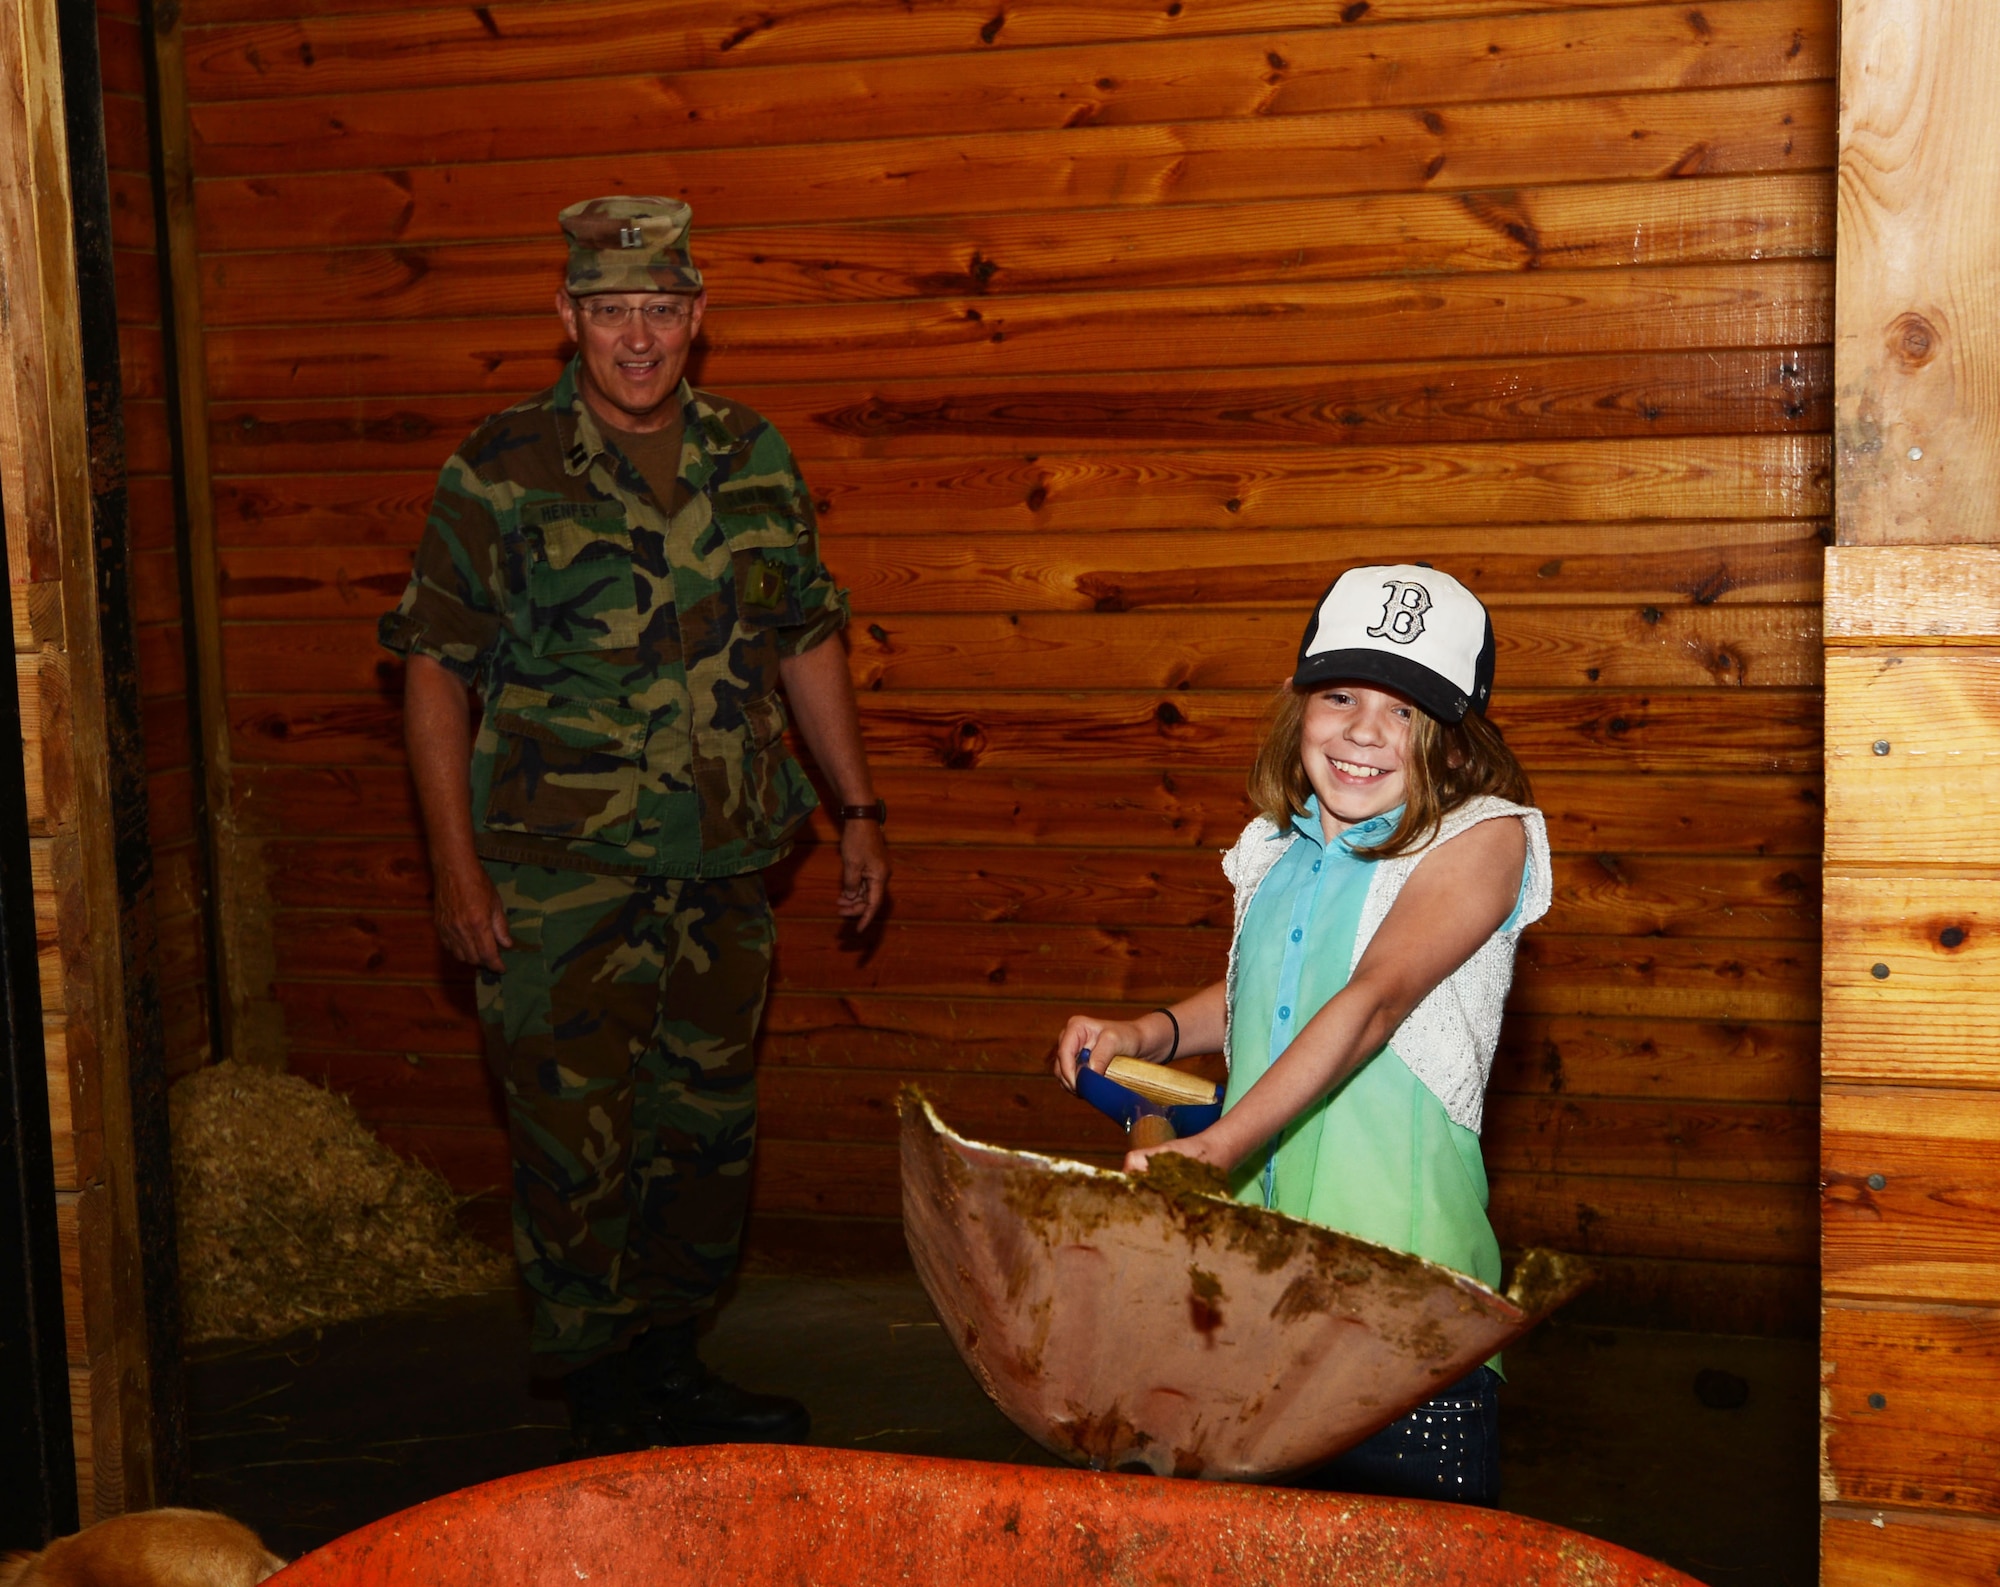 Gabriella Phillips, 9, mucks out a horse stall under the instruction of Capt. Edward Henfey, commanding officer of the 1st Company Governor's Horse Guard in Avon, Conn., June 21, 2014. Gabriella was participating in the Horses to Homecoming program, which includes teaching the children about barn duties while helping military children reconnect with their parents. (U.S. Air National Guard photo by Senior Airman Pierce)